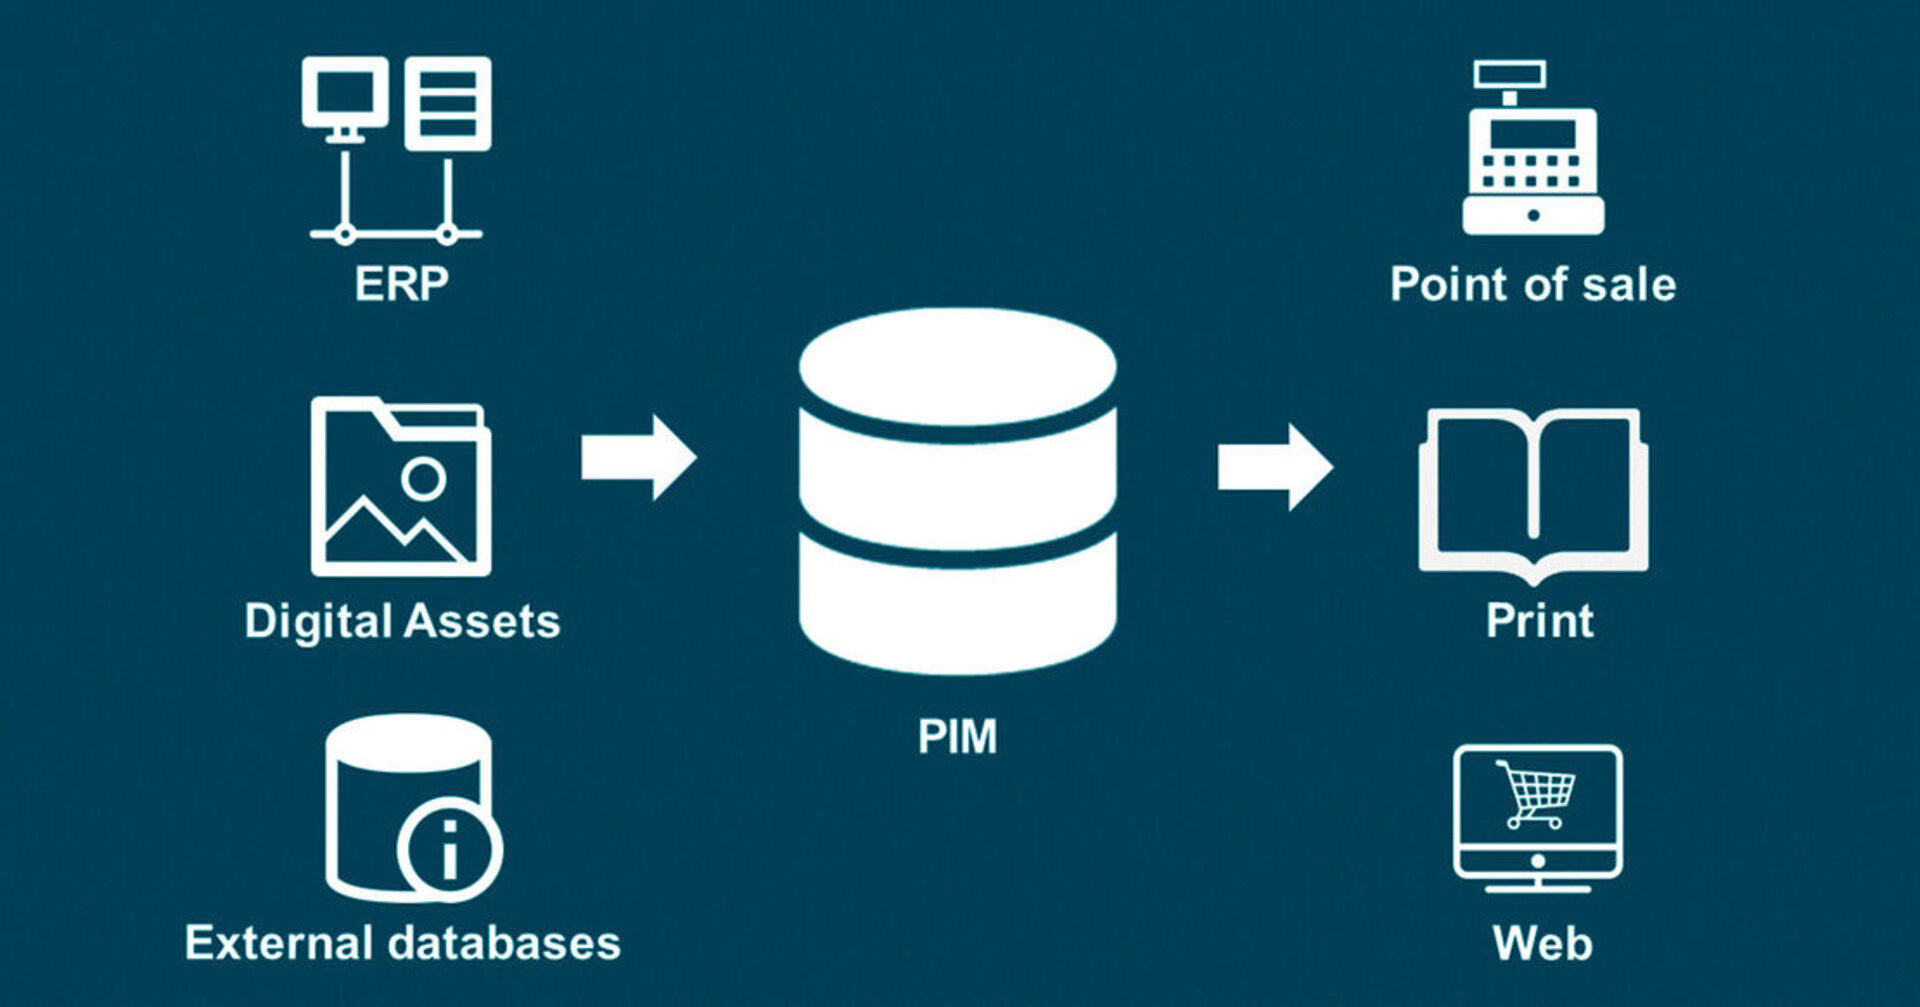 PIM is short for Product Information Management, i.e. handling, structuring, enrichment, maintenance and distribution of a company’s product data